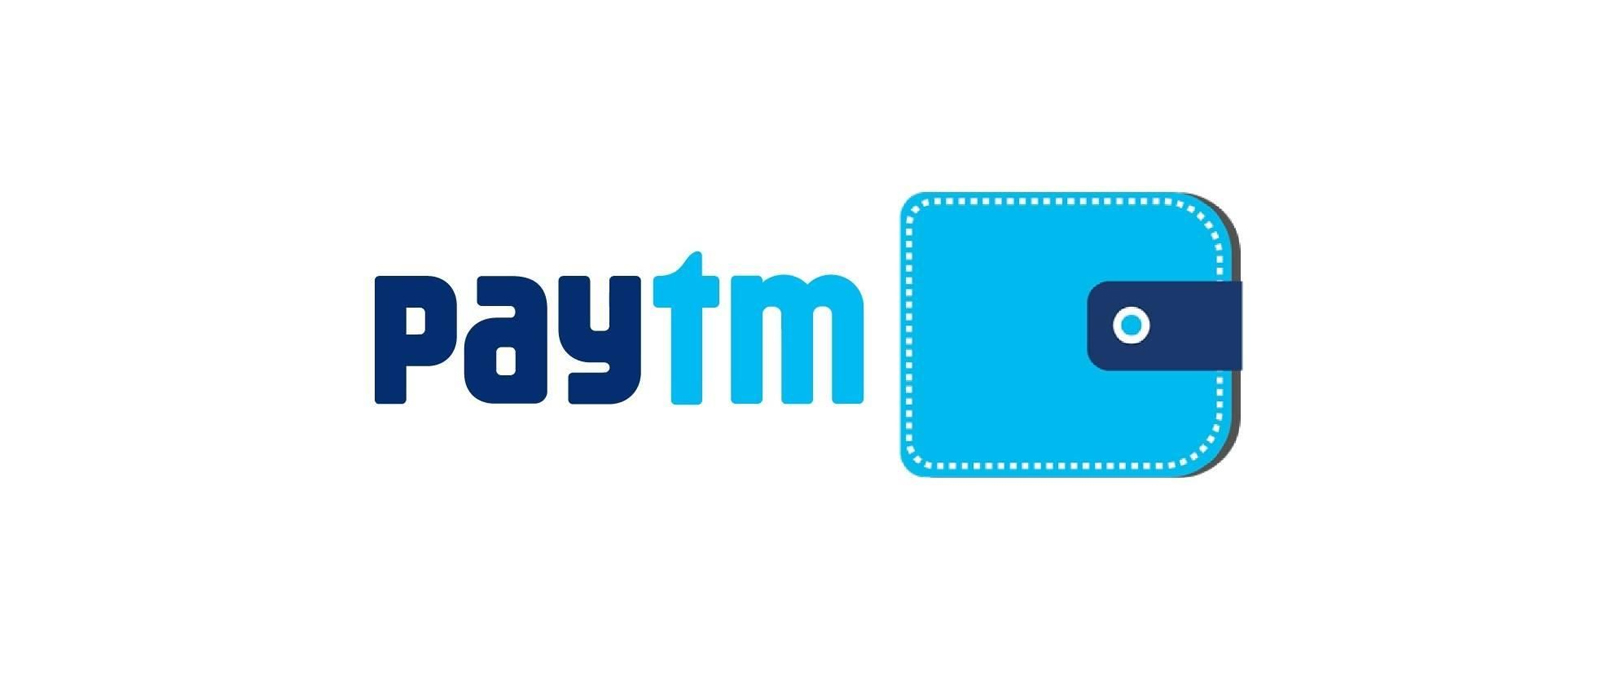 Paytm Acquires Mobile Tech Startup Cube26,Startup Stories,Startup News India,Latest Business News 2018,Mobile Tech Startup Cube26,Paytm Business News,Tech Startup Cube26,Paytm Acquires Flipkart Backed Cube26,Paytm Founder,Paytm Founder Vijay Shekhar Sharma